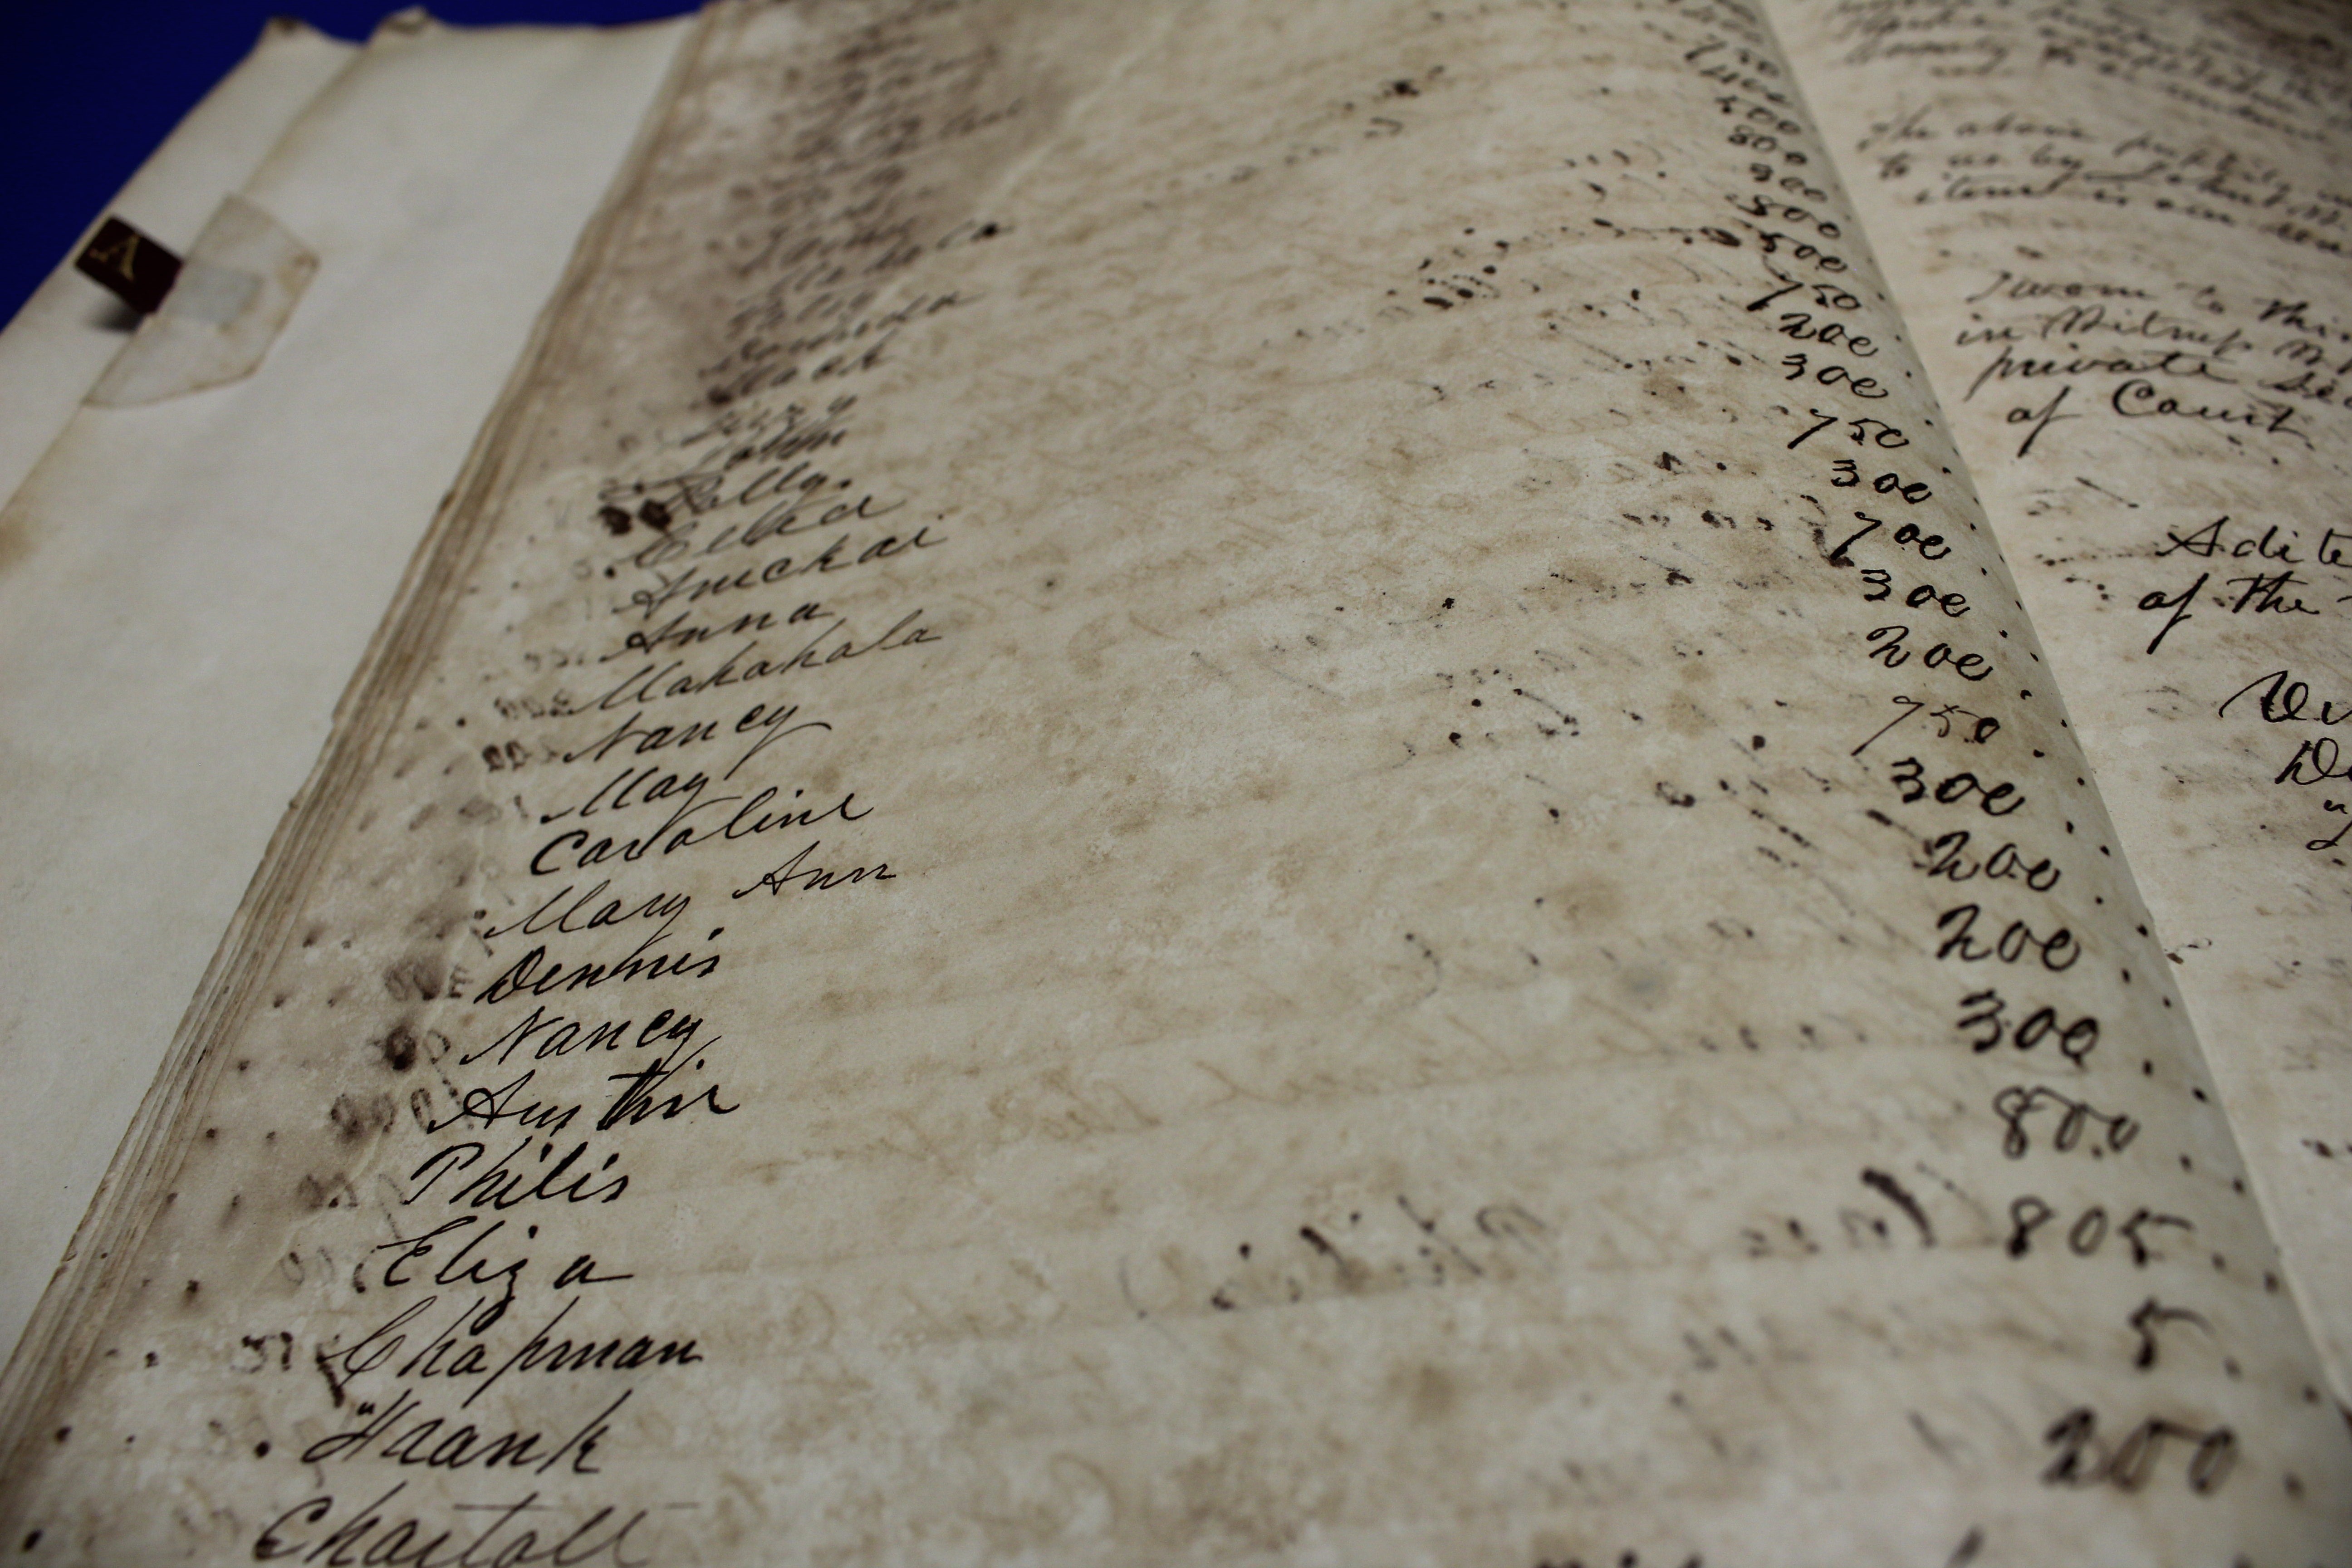 The probate list of the names of enslaved people is pictured here.